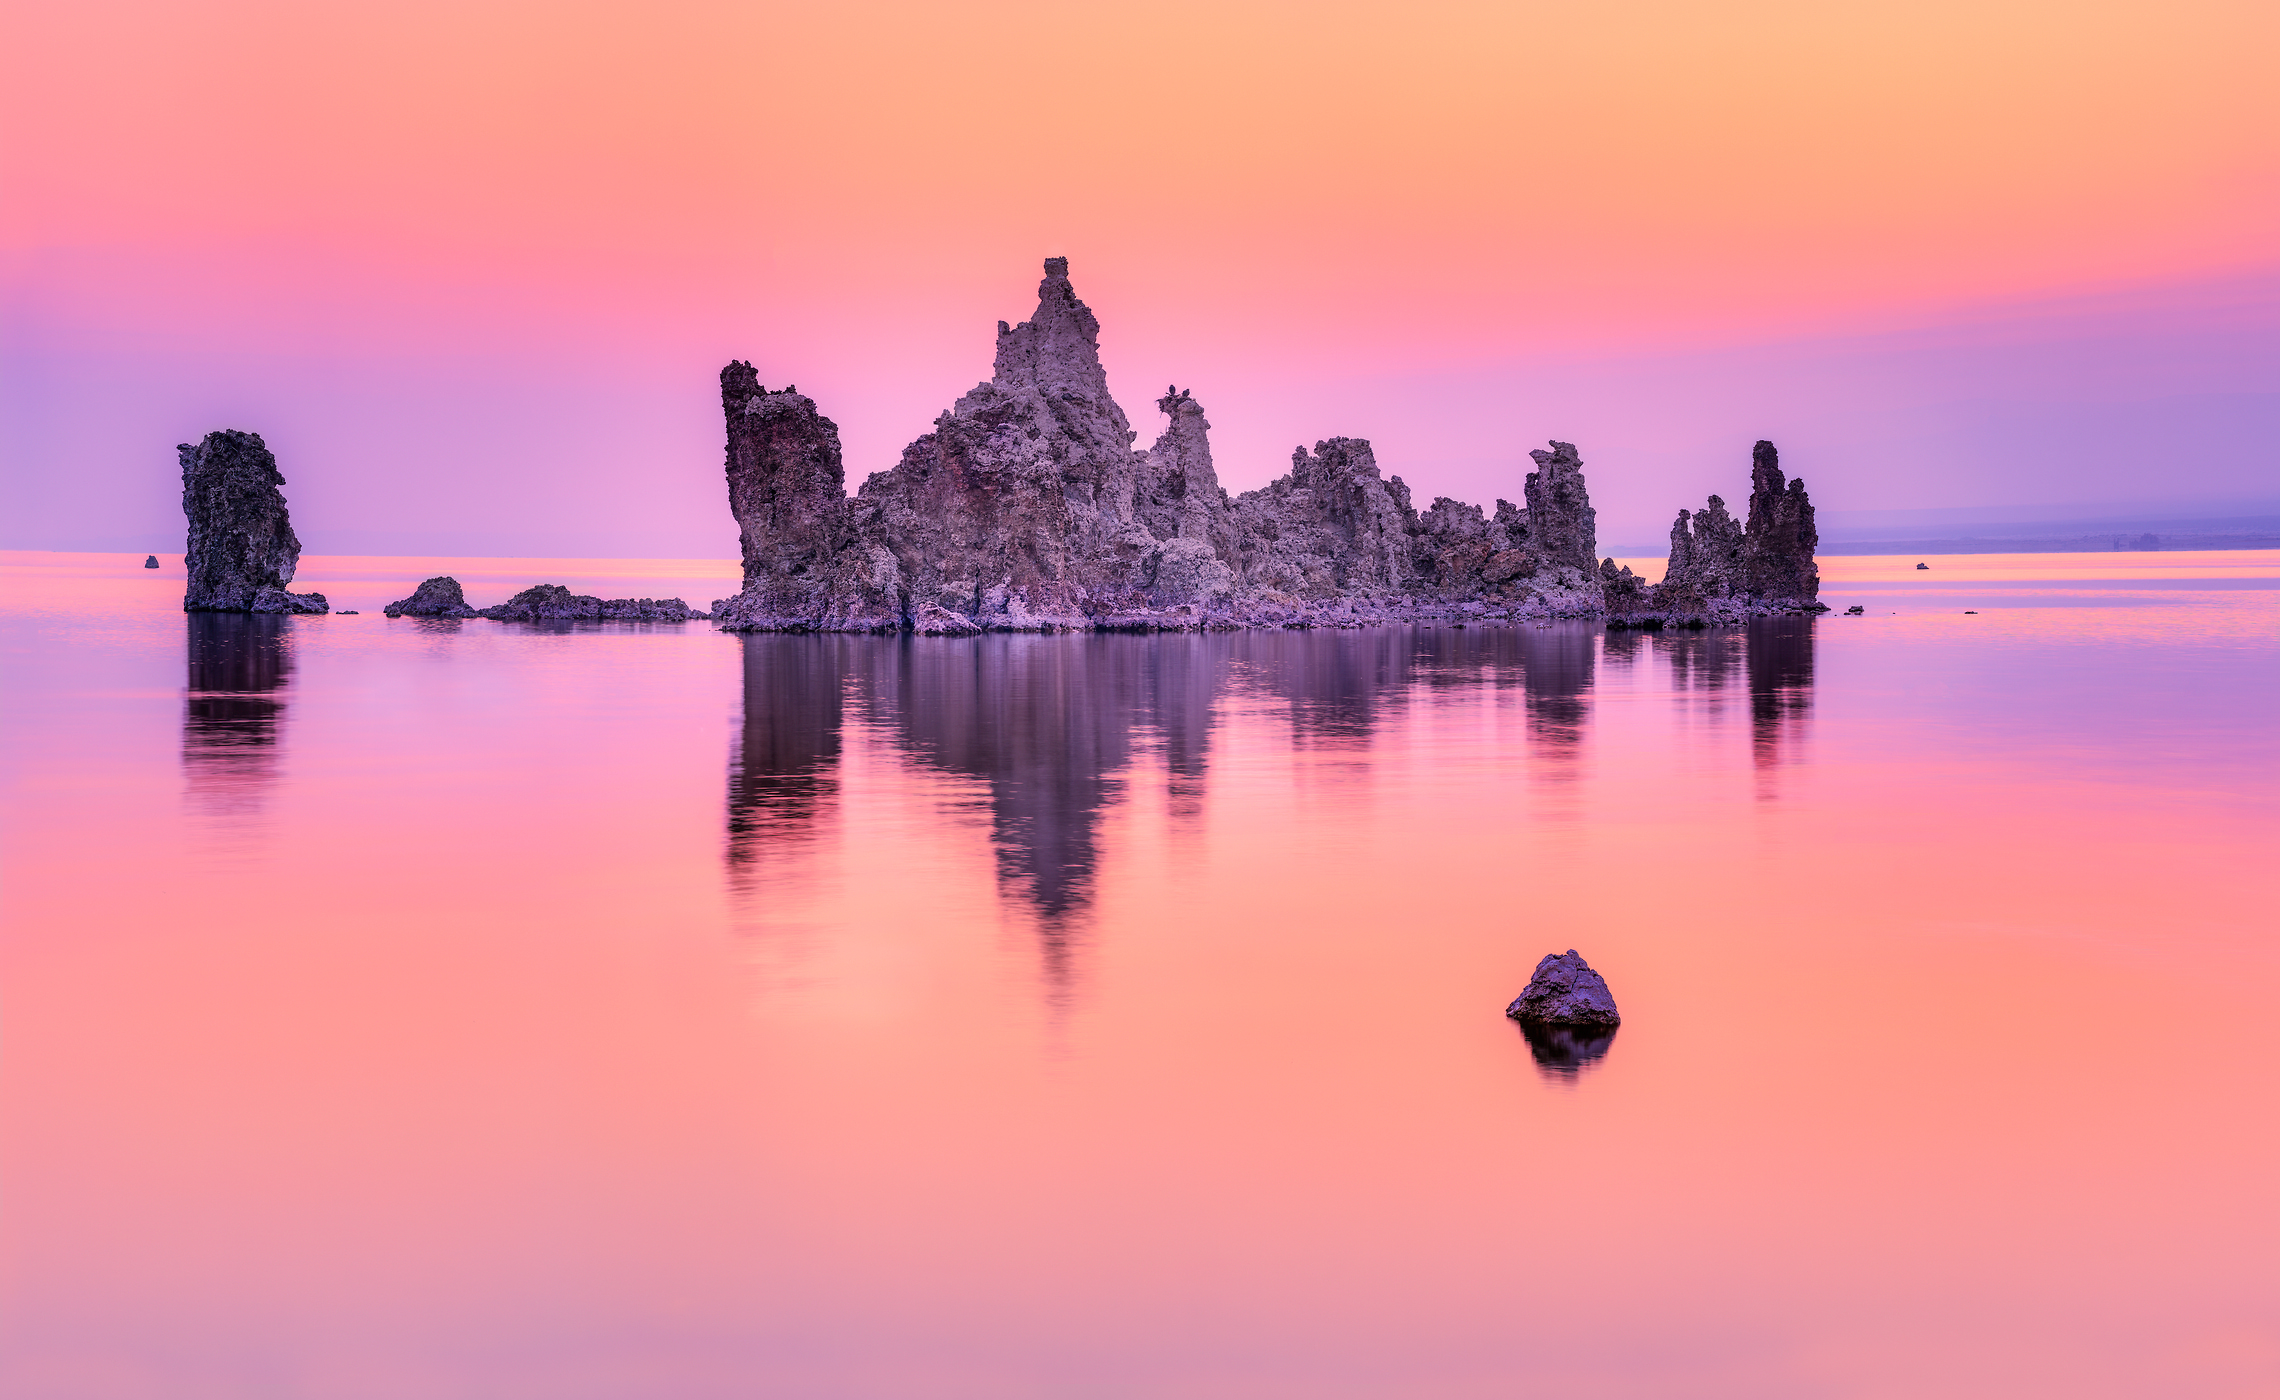 290 megapixels! A very high resolution, large-format VAST photo print of tufa towers in Mono Lake at sunrise; nature photograph created by Chris Blake in Mono Lake, Mono County, California.